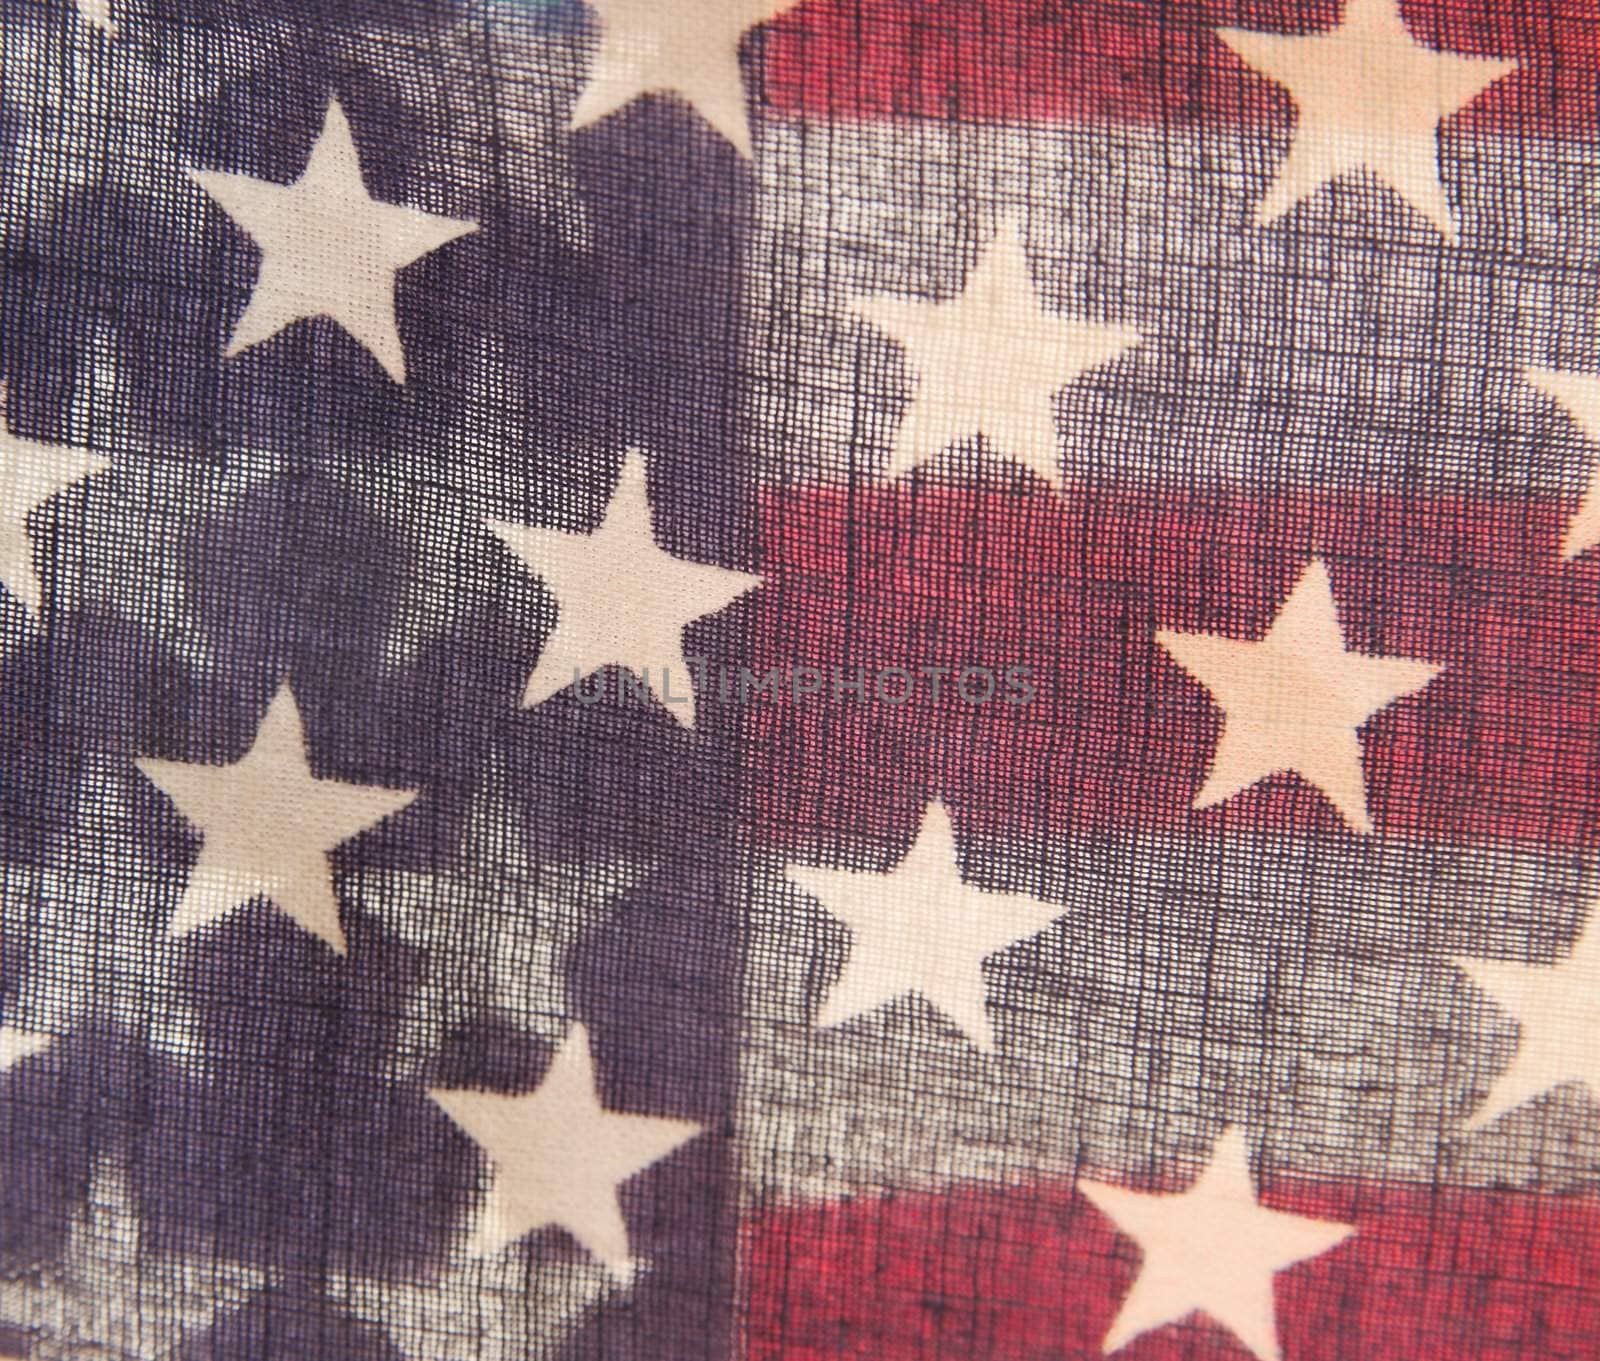 U.S. flag overlaid with another